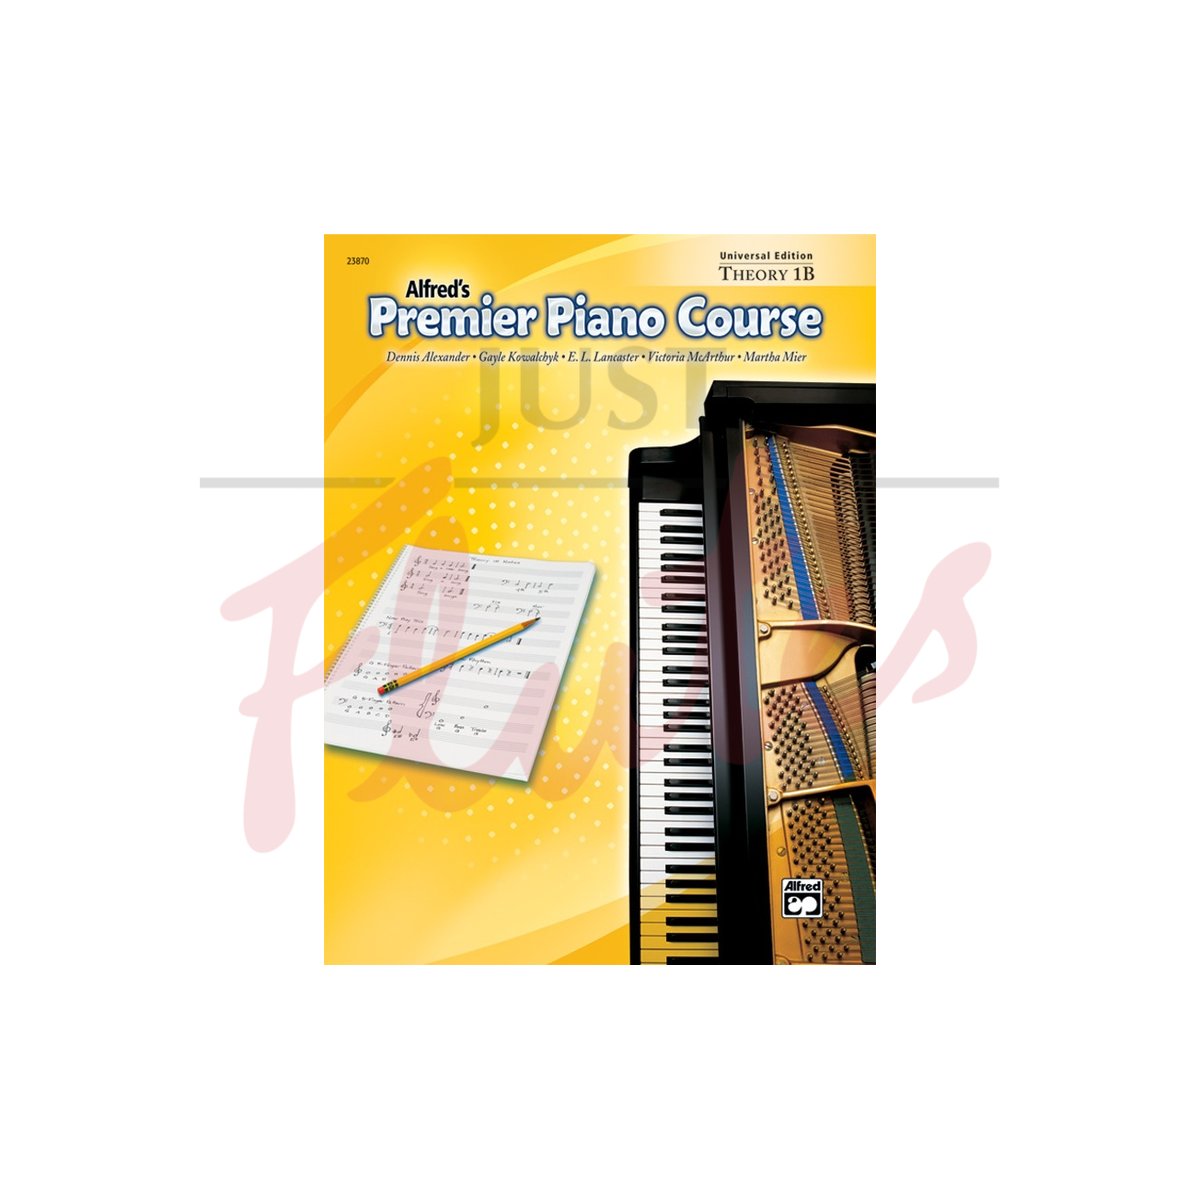 Alfred's Premier Piano Course - Theory 1B